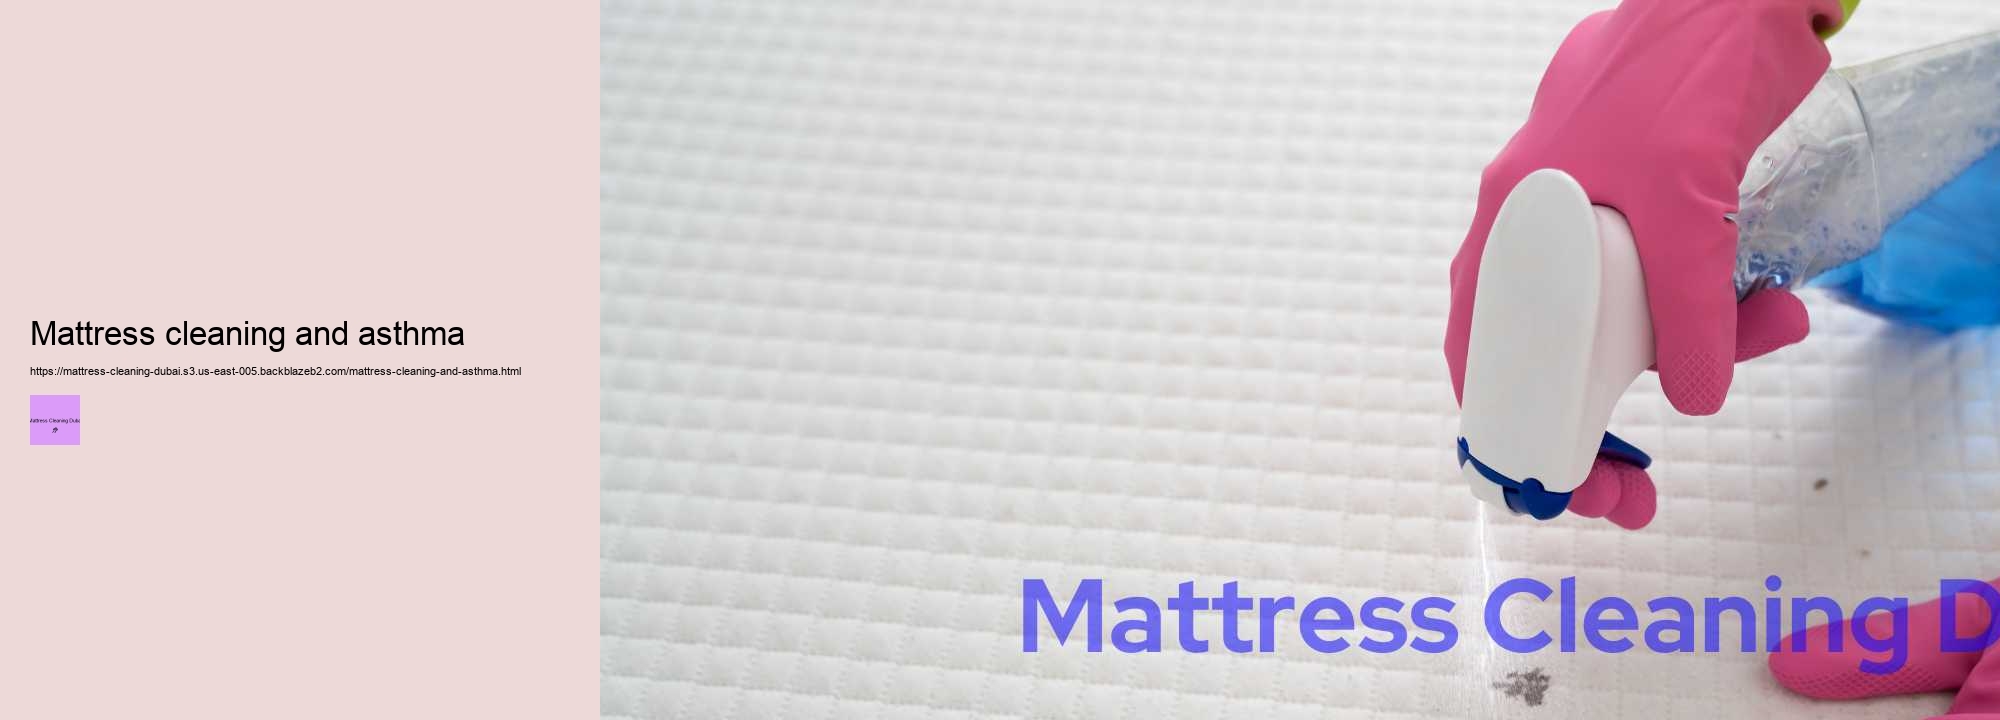 Mattress cleaning and asthma